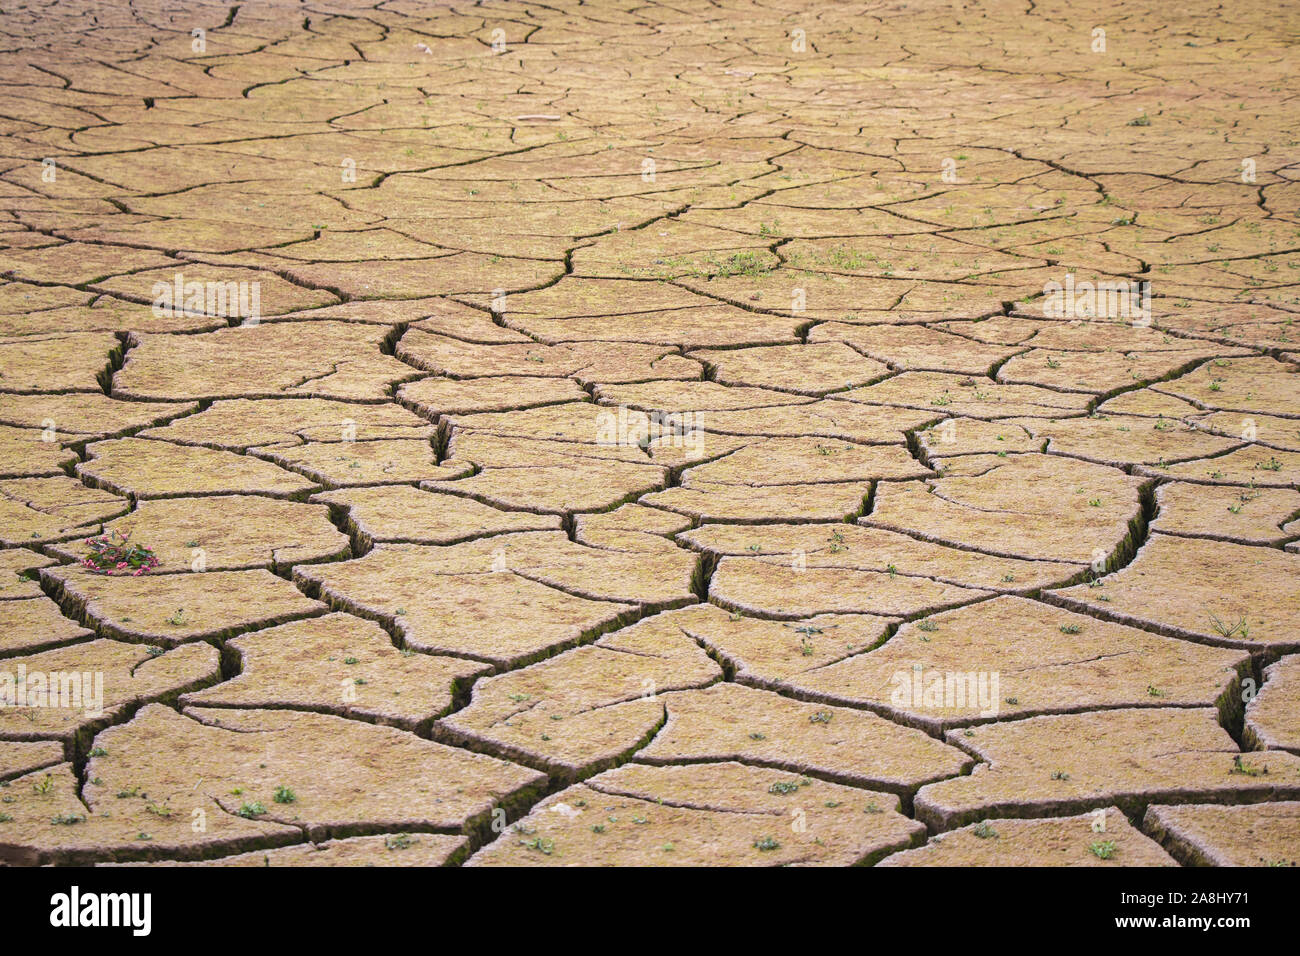 Desert with big cracks caused by a severe drought. Global warming consequences. Stock Photo